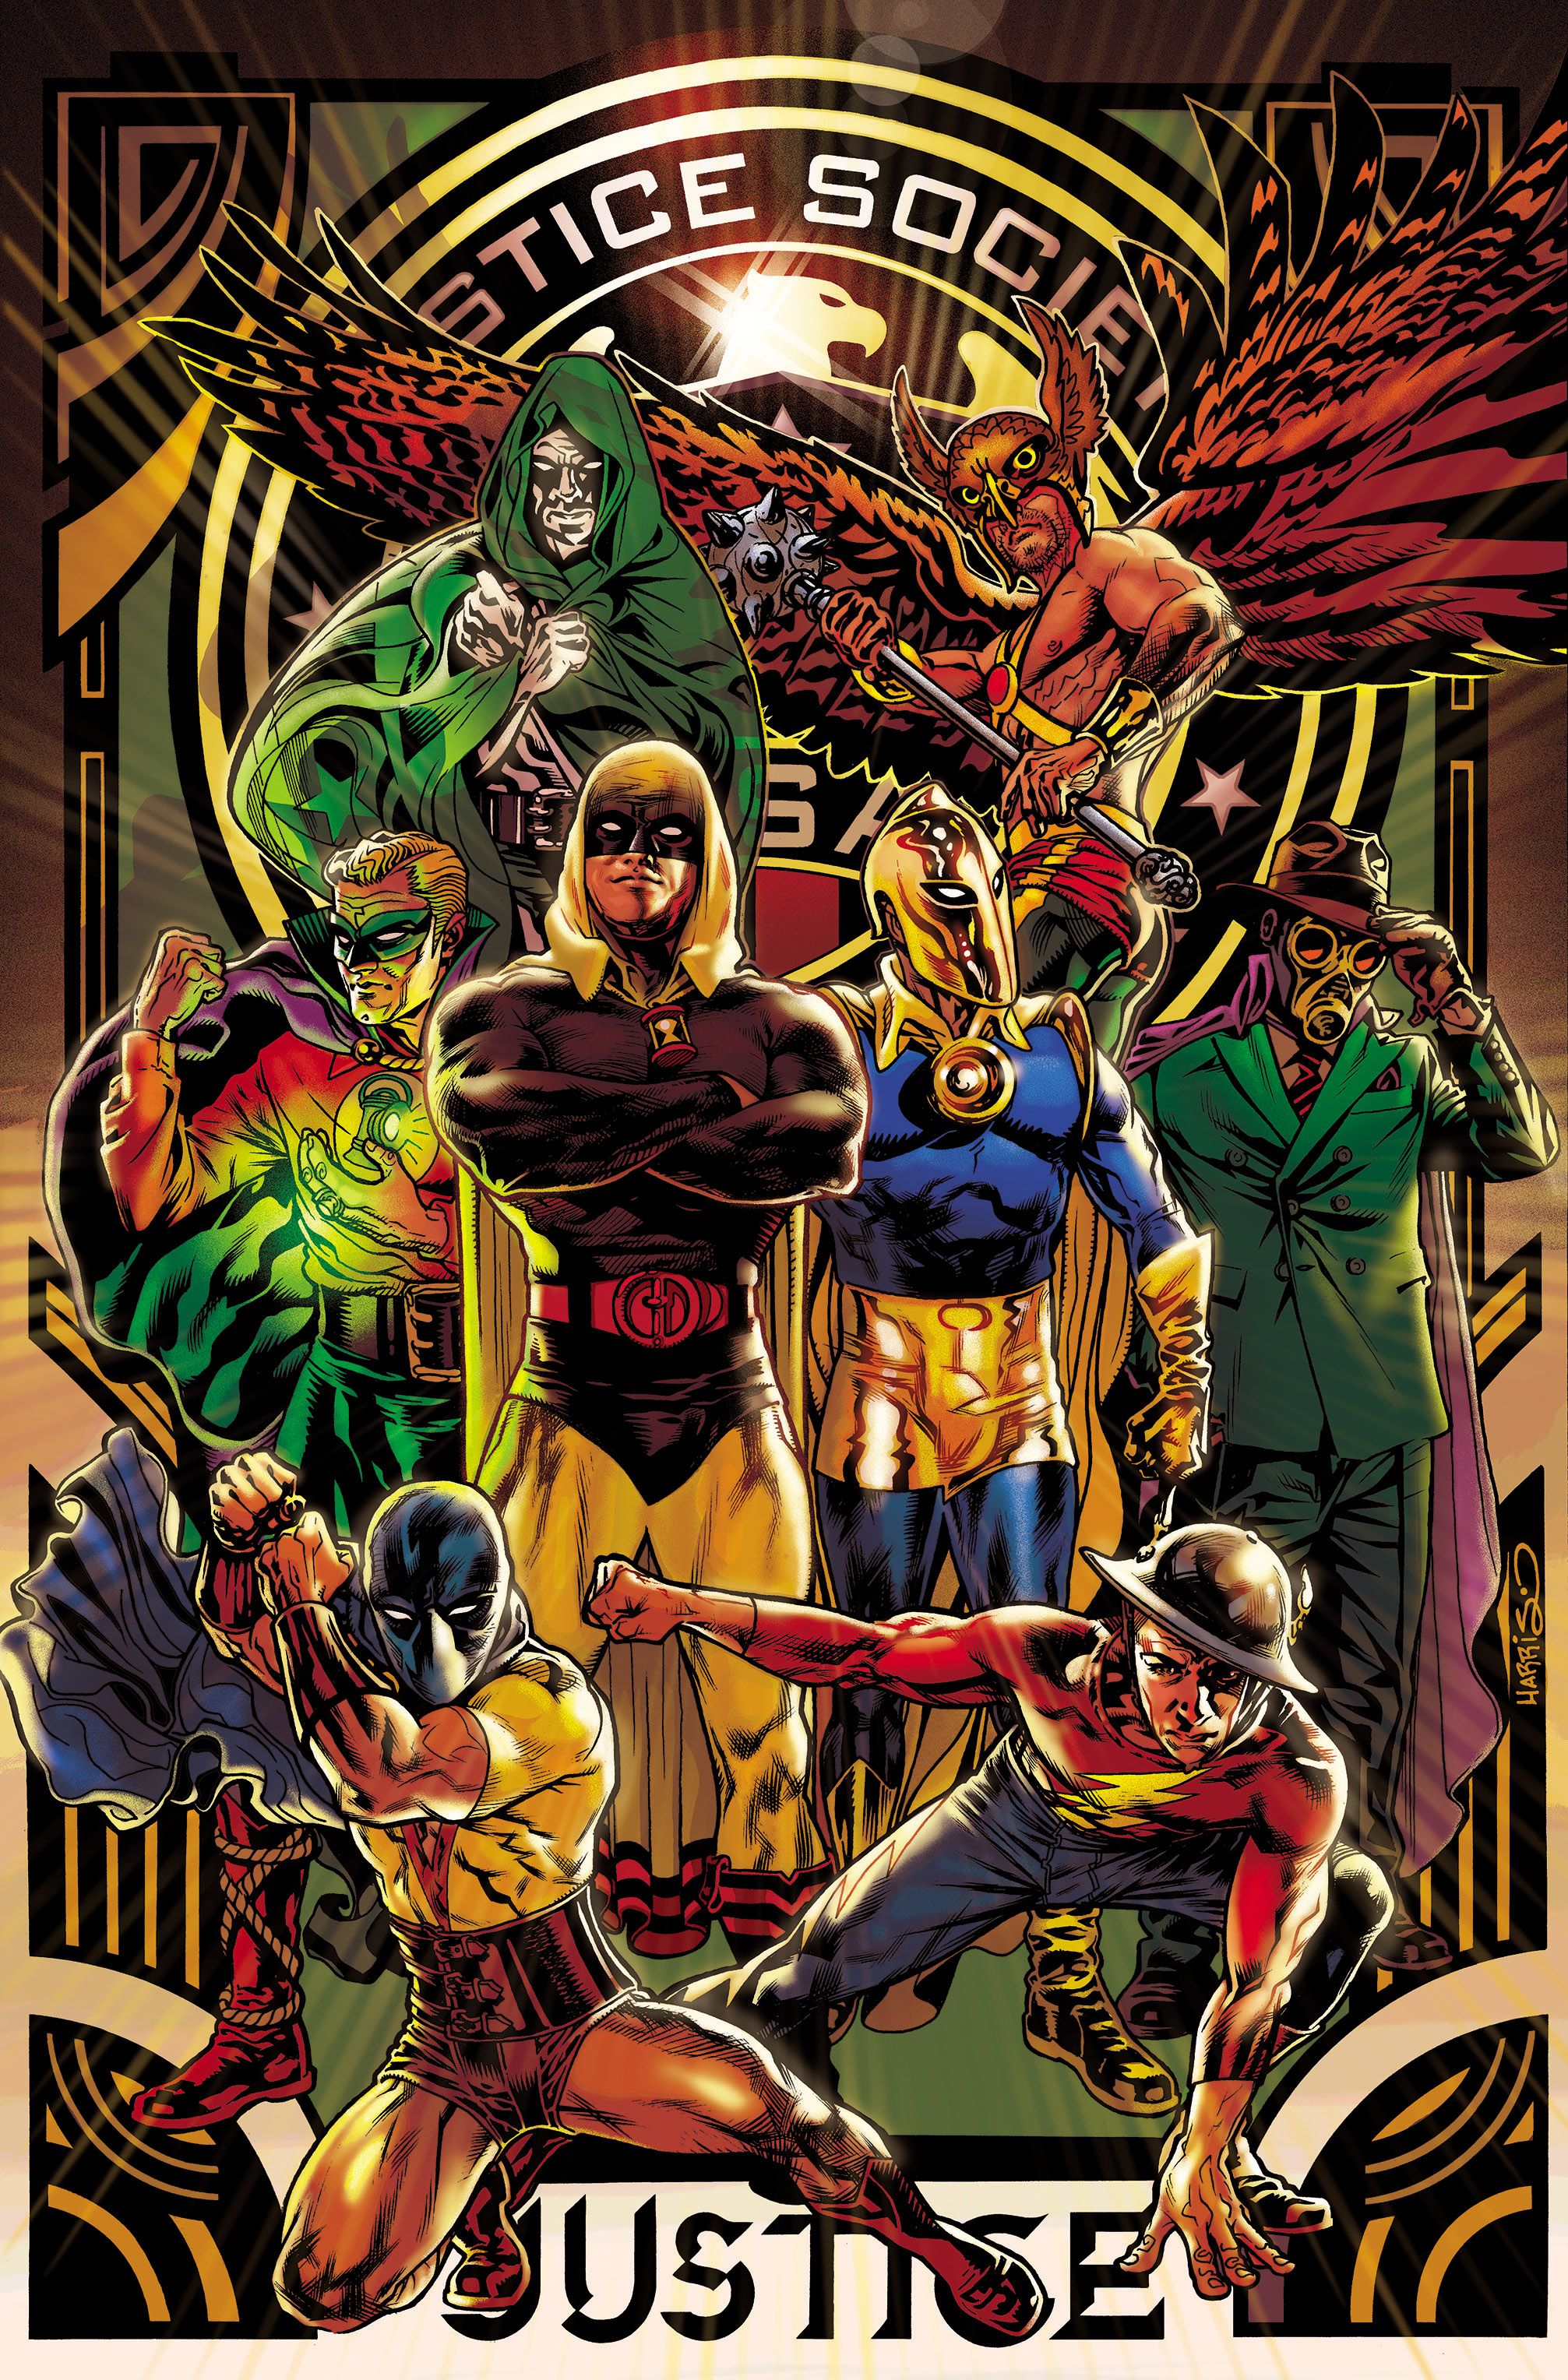 Justice Society of America 8 Open to Order Variant